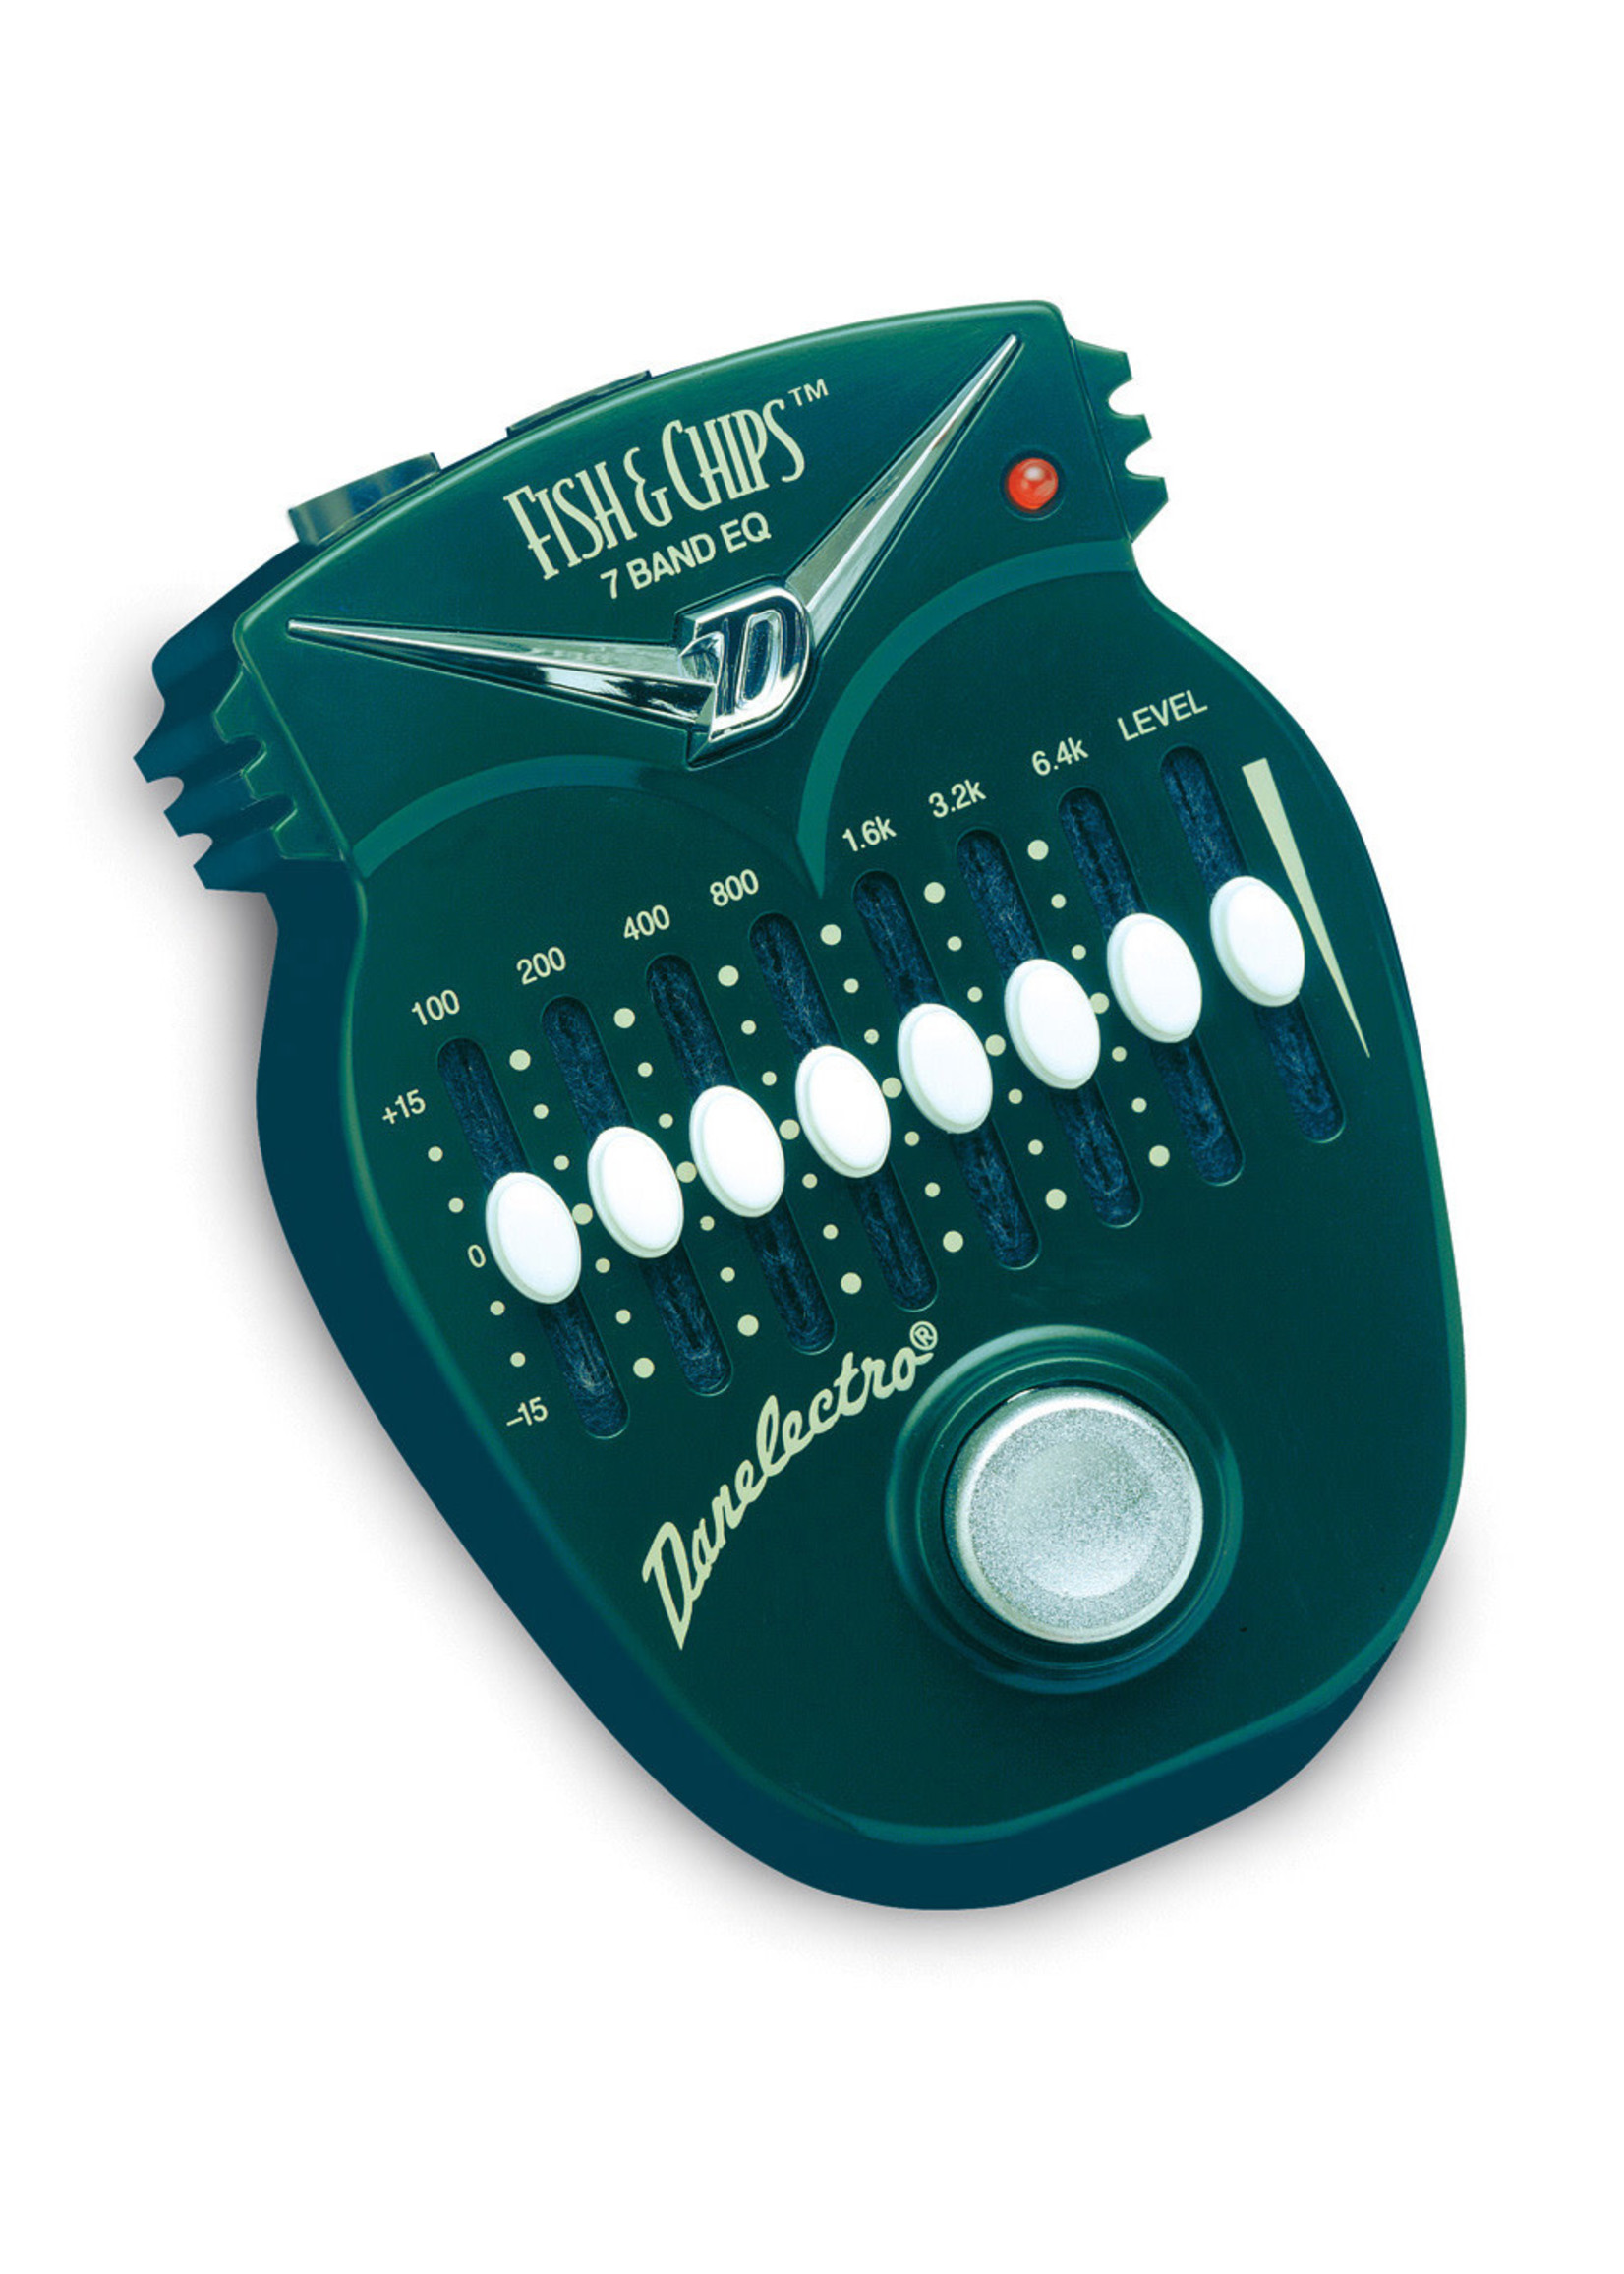 Danelectro FISH & CHIPS 7 BAND EQ PEDAL